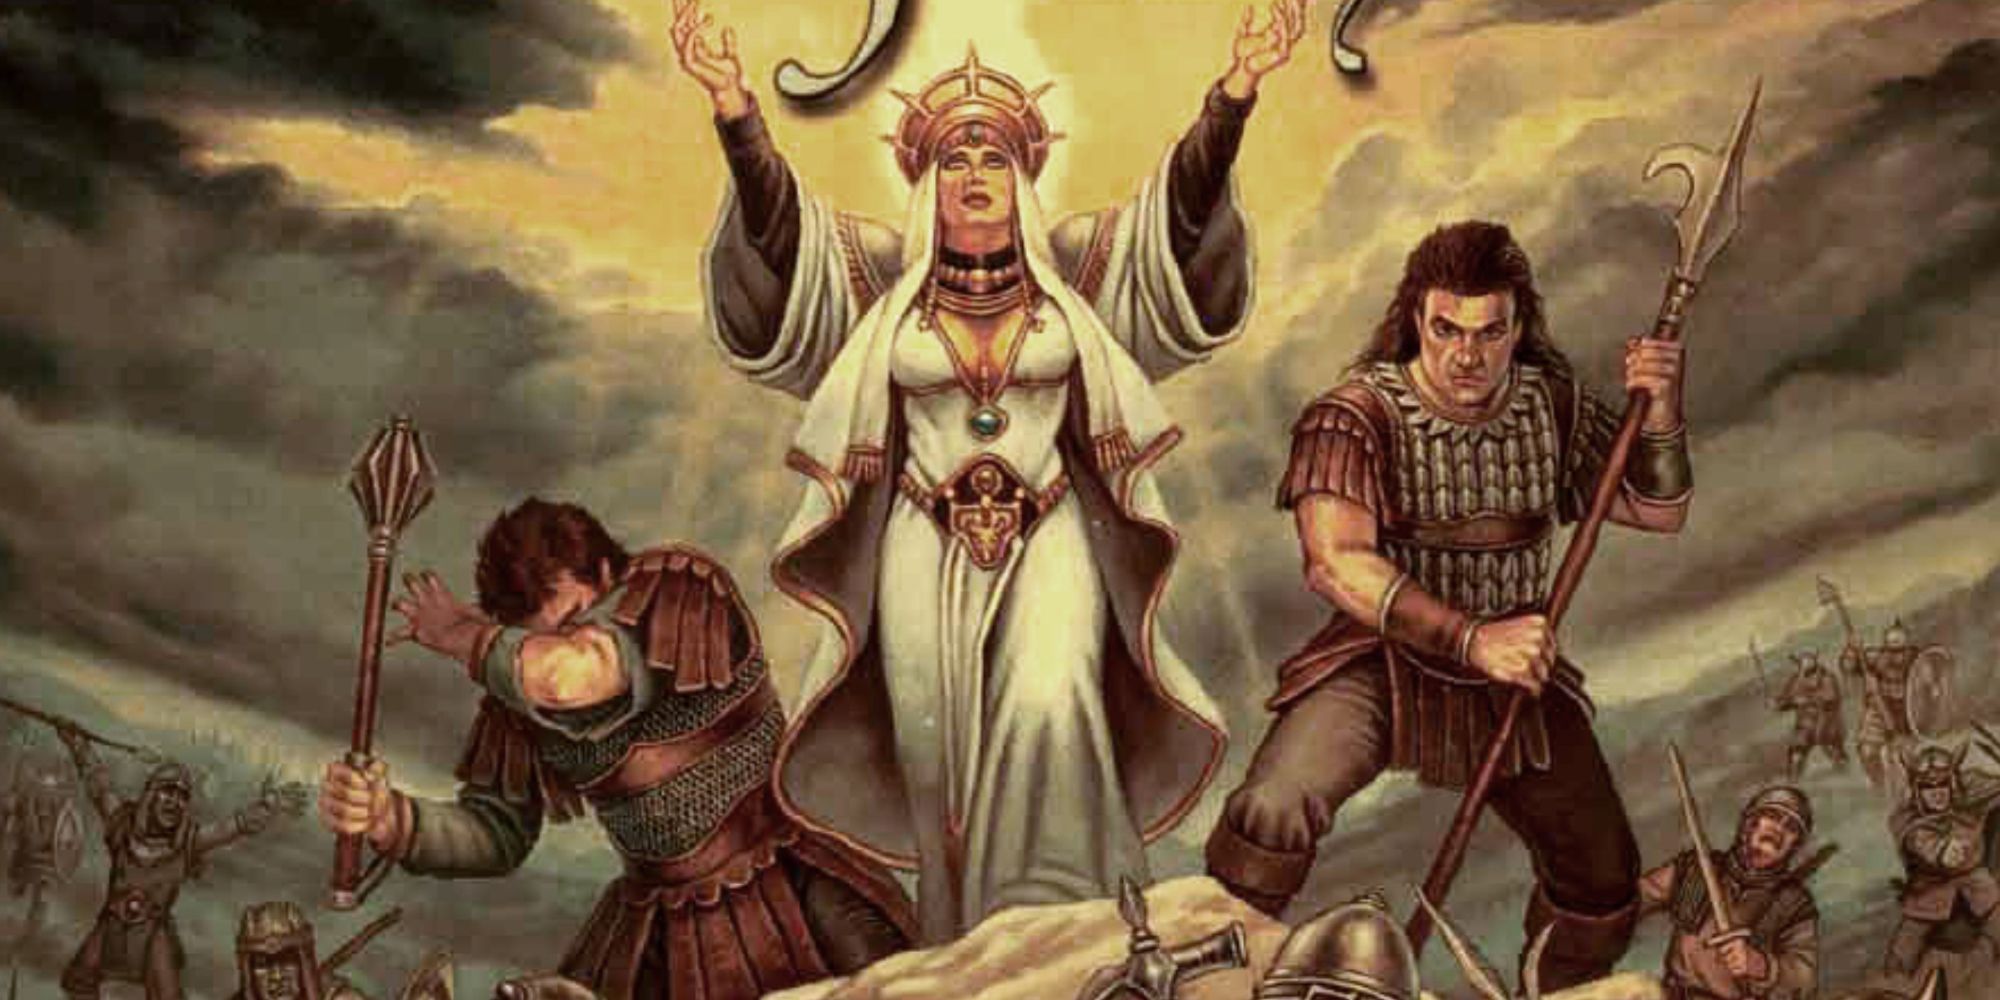 The cover art to Dungeons & Dragons Bastion of Faith book, depicting a cleric summoning light